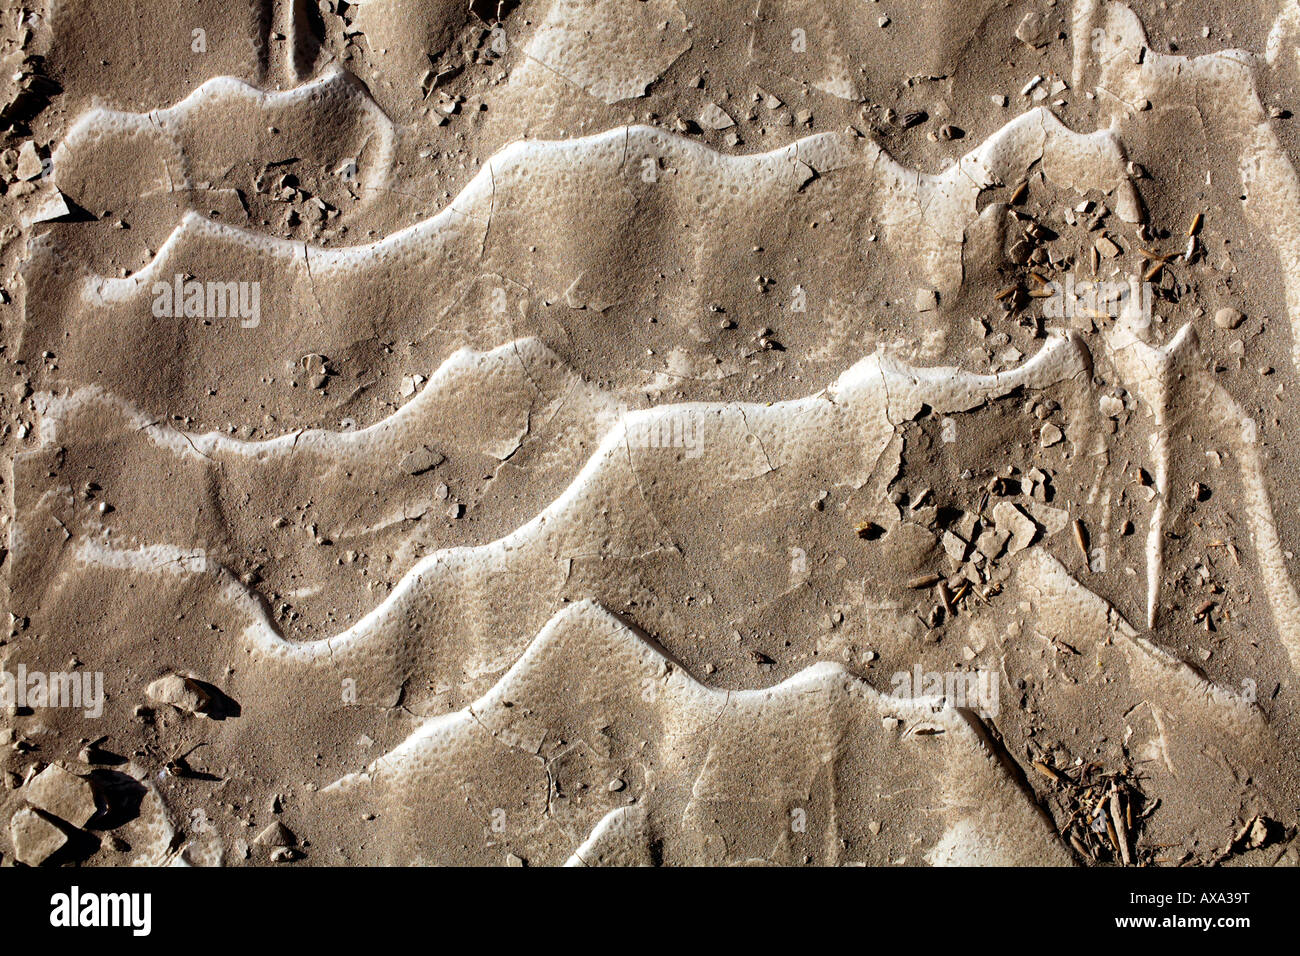 Ripple marks on a dry stream bed Stock Photo